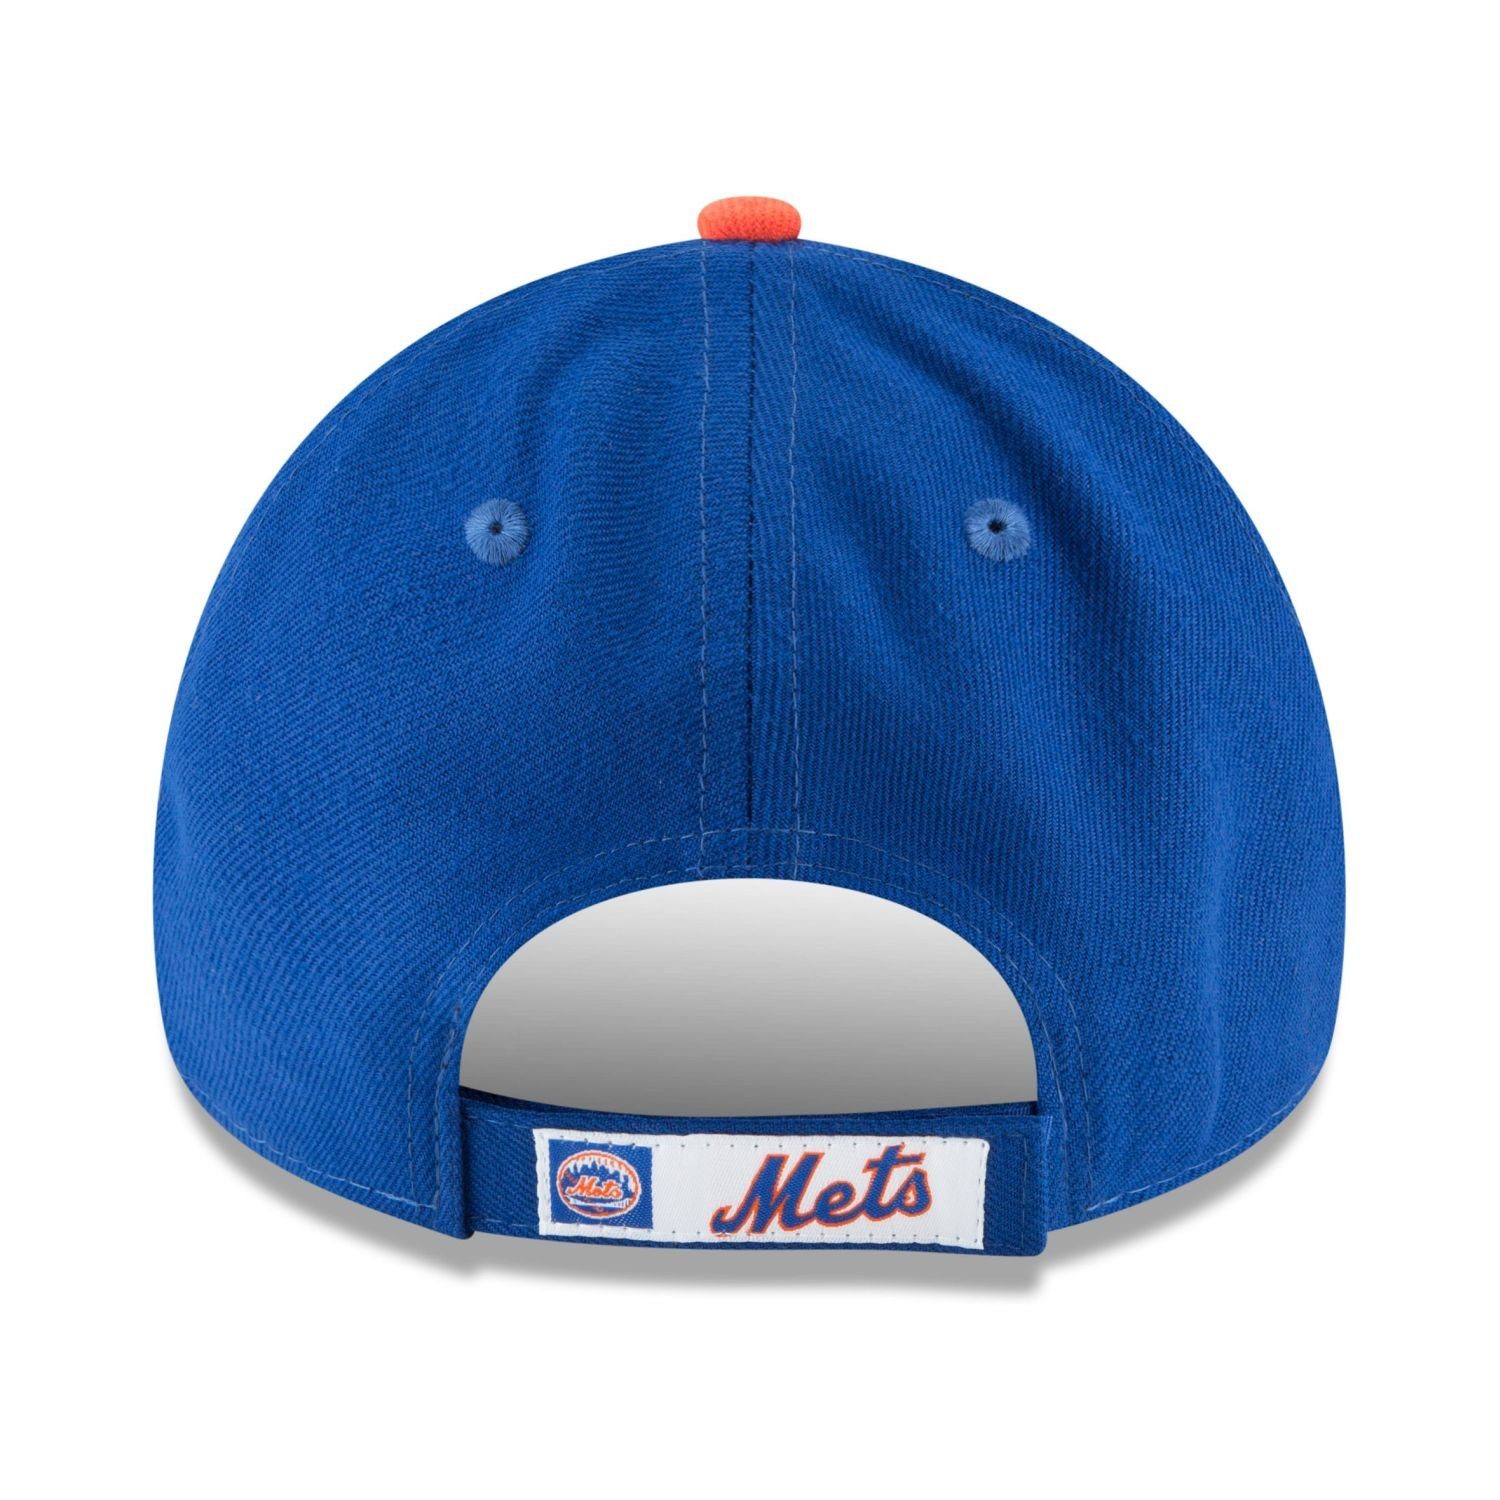 Baseball Mets Cap 9Forty York New New LEAGUE Era Youth